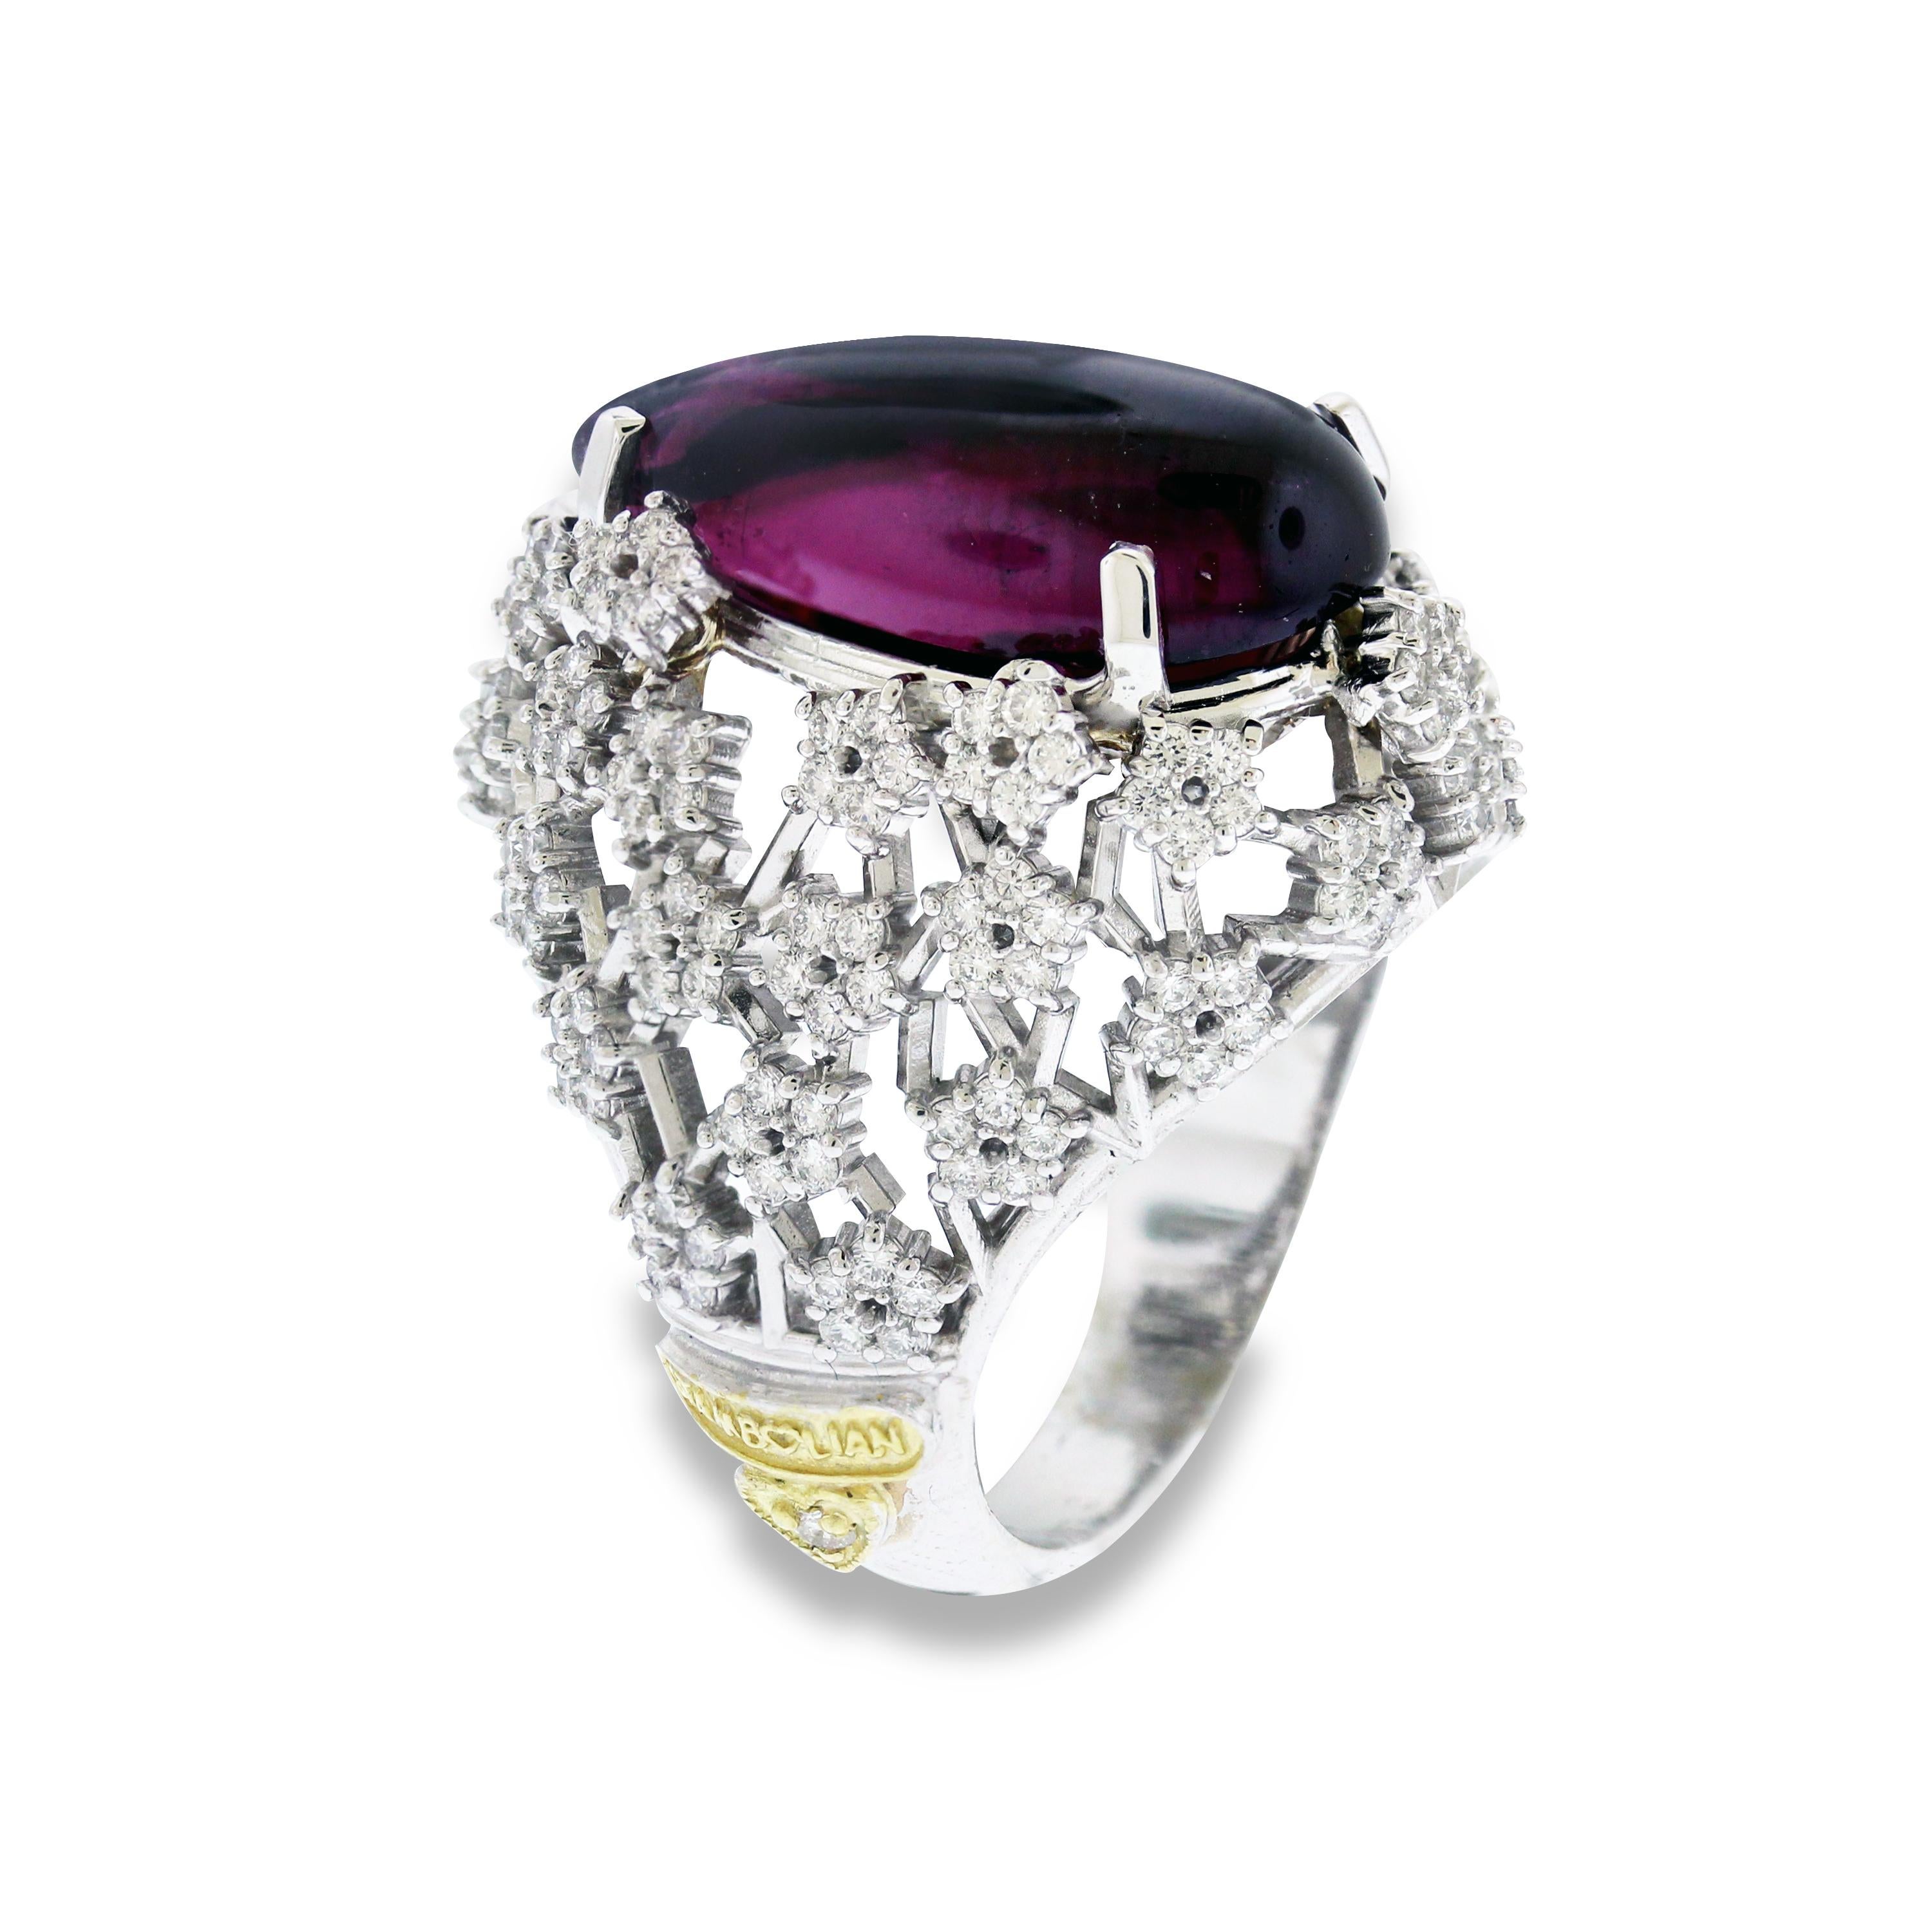 IF YOU ARE REALLY INTERESTED, CONTACT US WITH ANY REASONABLE OFFER. WE WILL TRY OUR BEST TO MAKE YOU HAPPY!

18K White Gold and Diamond Cocktail Ring with Cabochon Pear shape Rubellite Tourmaline center

8.23 carat Rubellite center

1.46 carat G